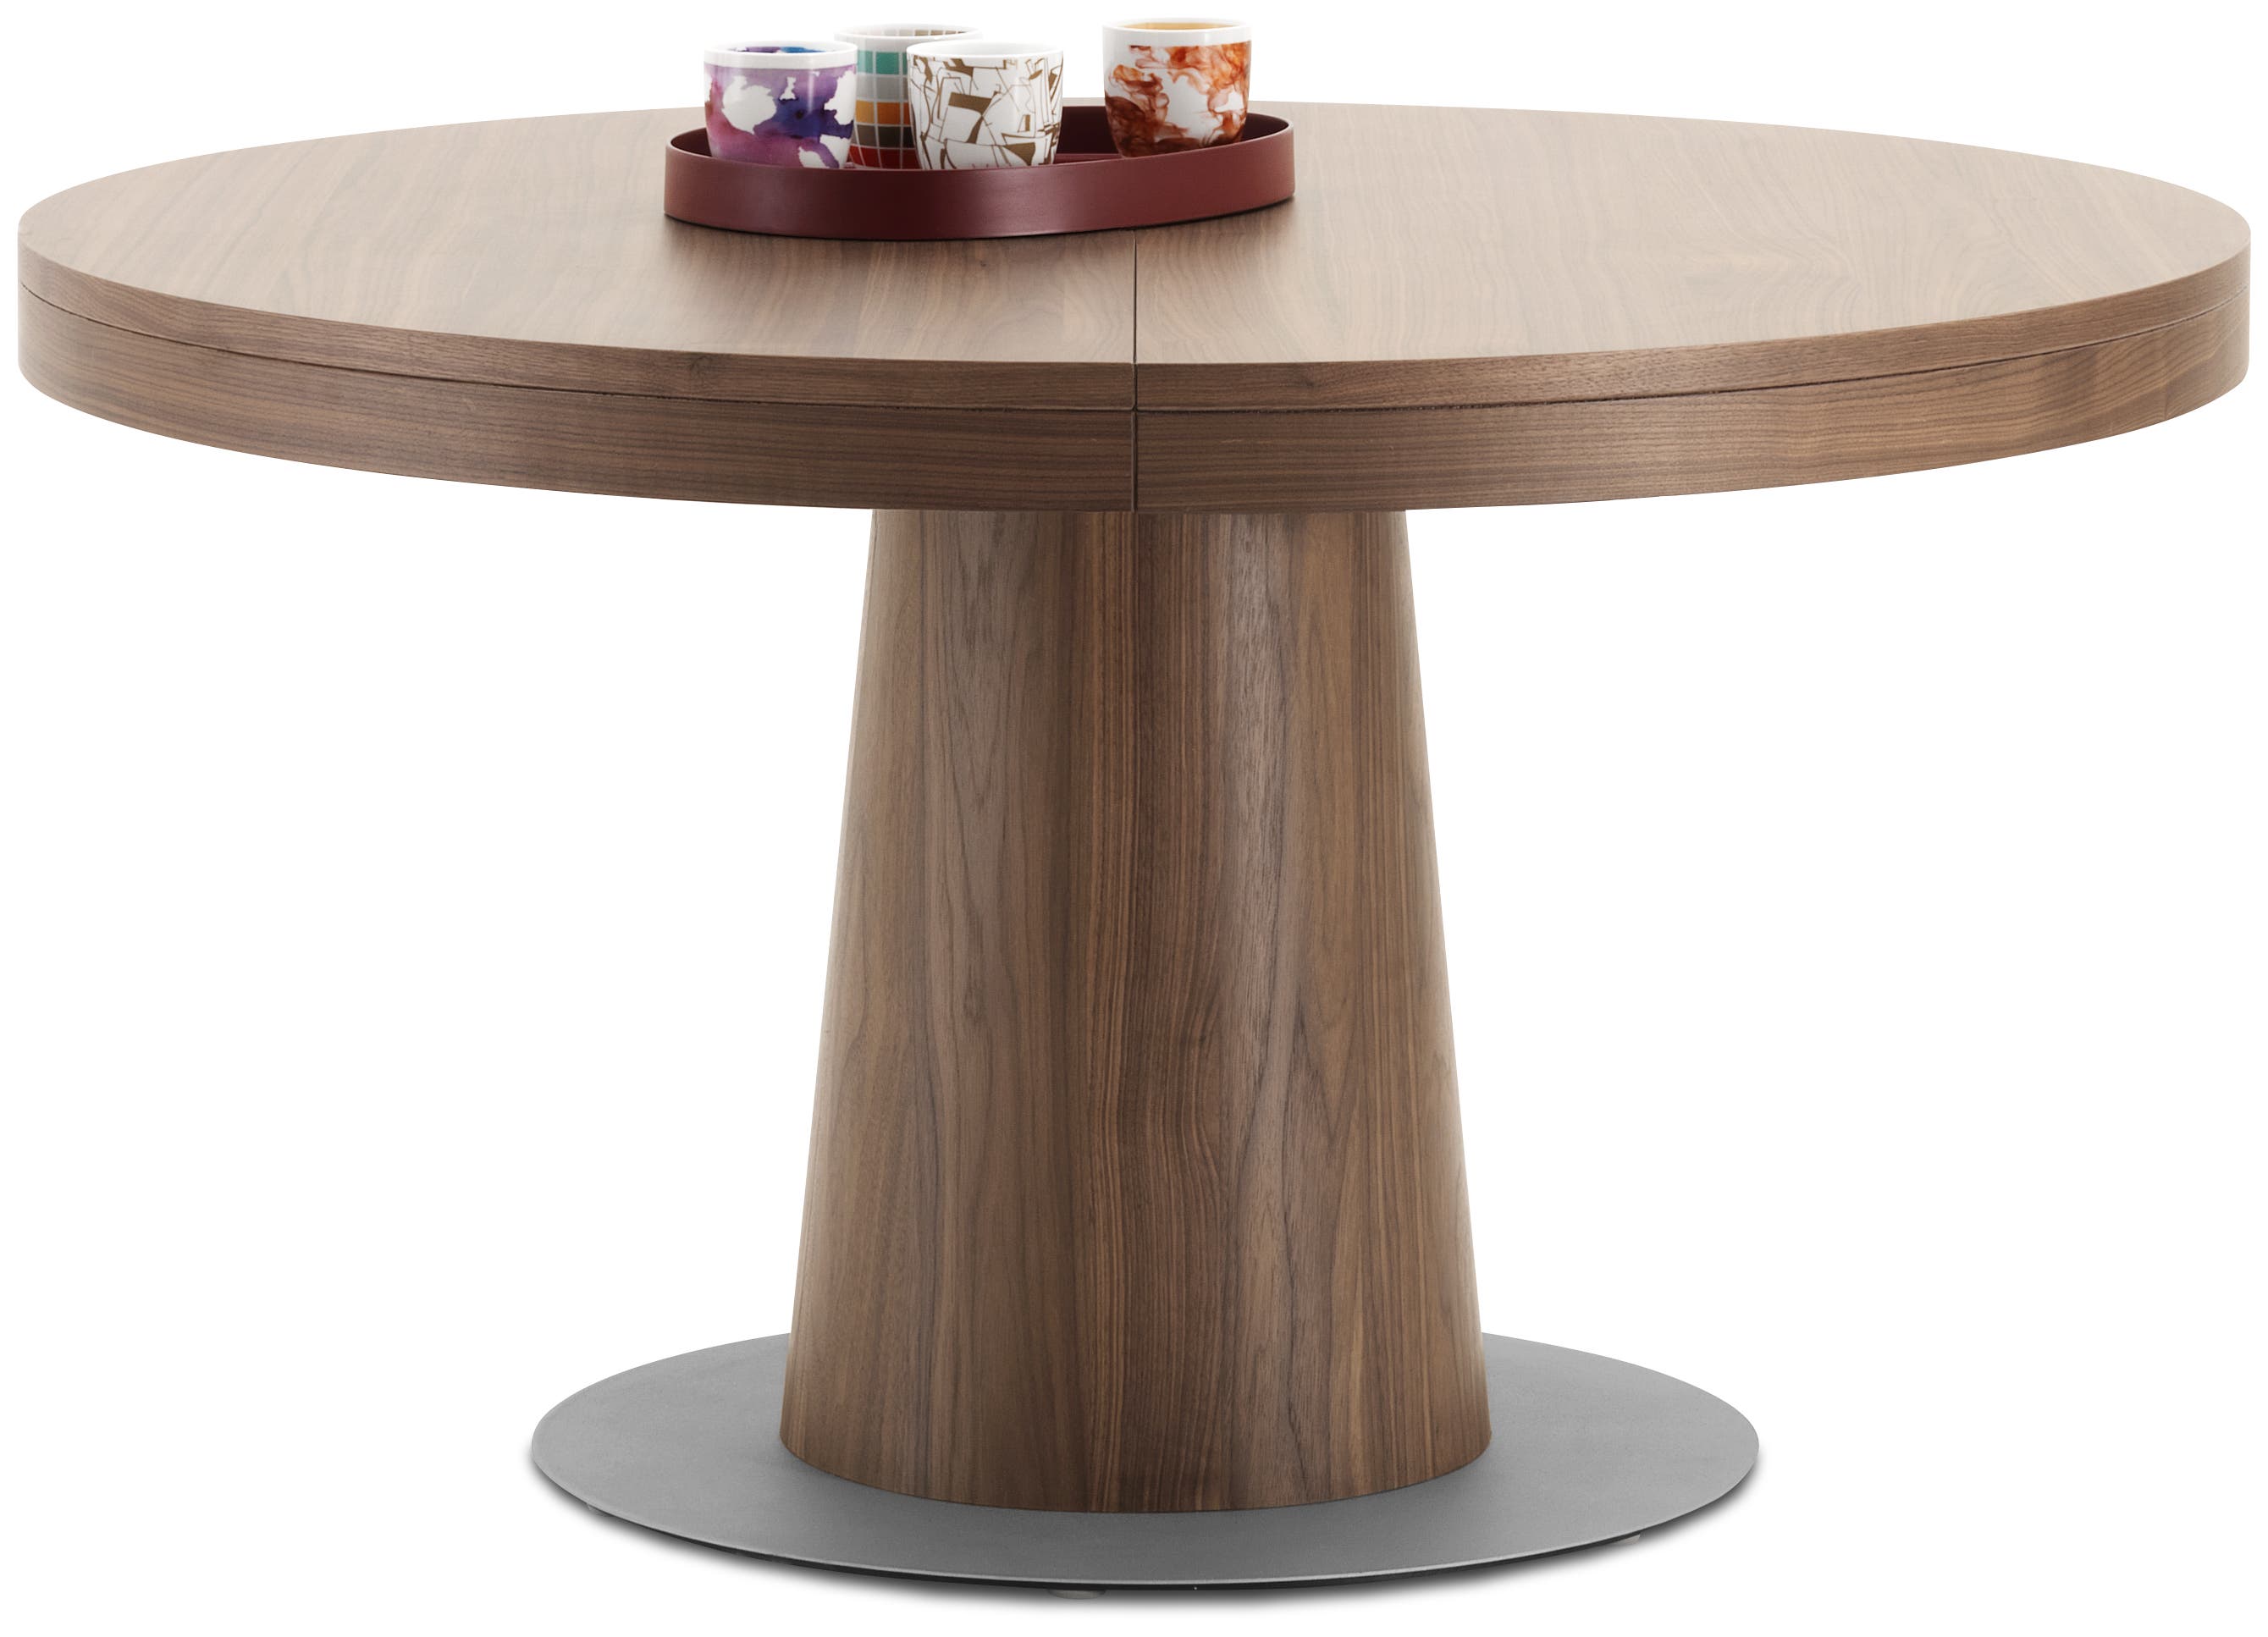 Granada extendable dining table